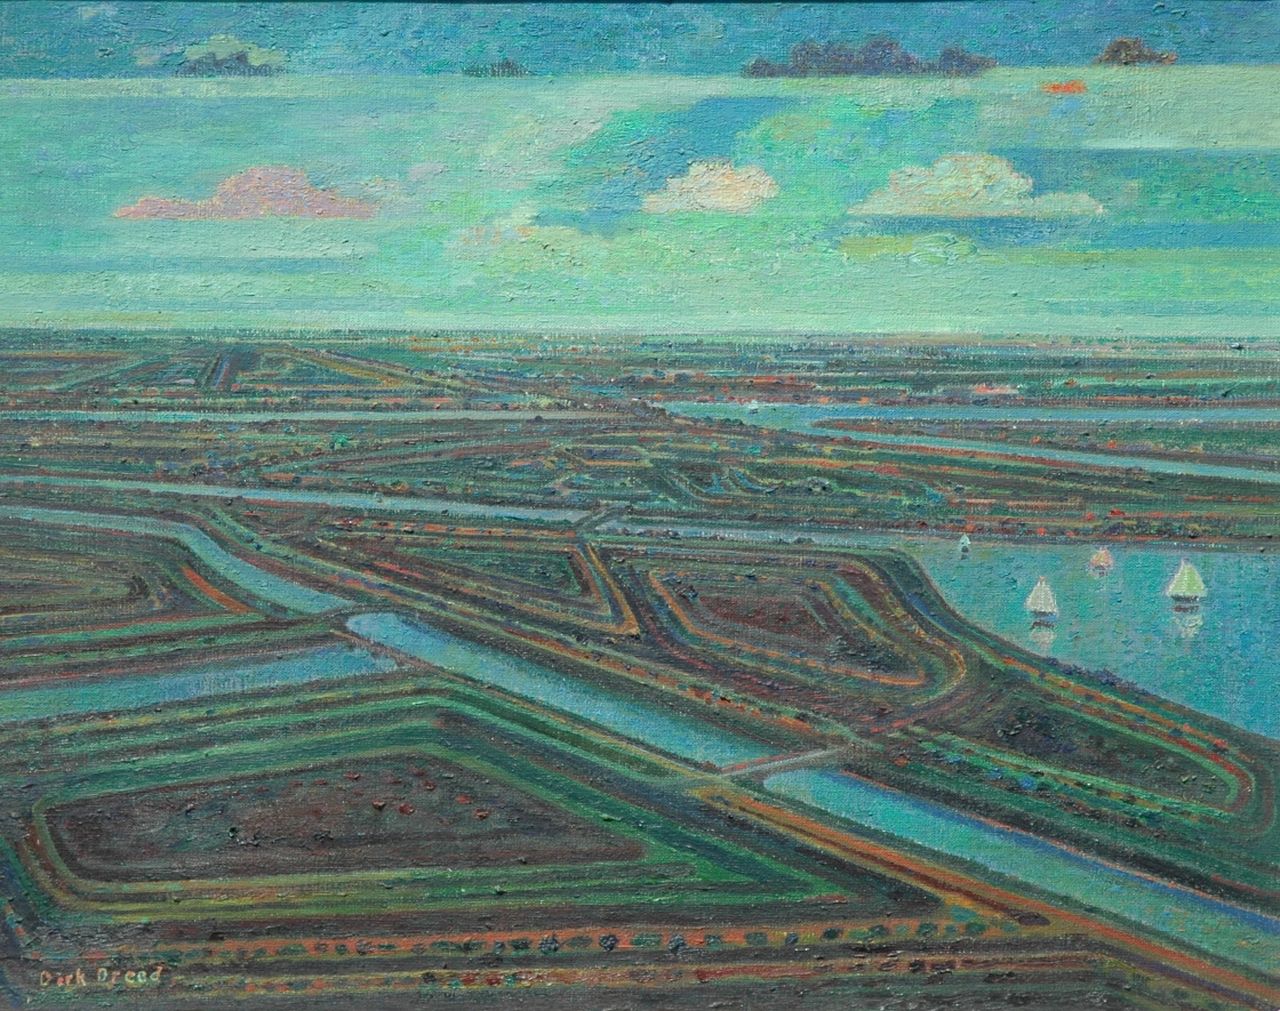 Breed D.C.  | 'Dirk' Cornelis Breed, Panorama 3, oil on canvas 40.2 x 49.8 cm, signed l.l.